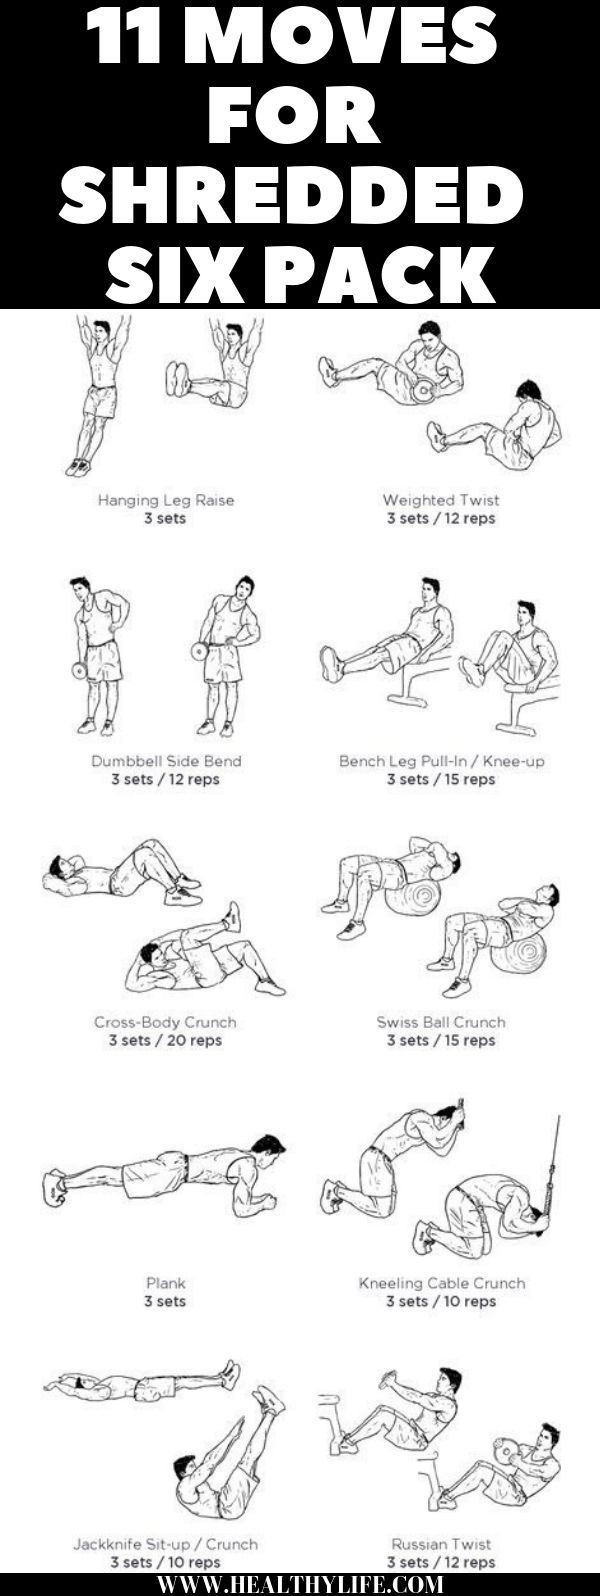 11 ABS WORKOUT ROUTINE FOR MEN TO GET A SIX PACK FAST -   11 fitness Workouts for men ideas